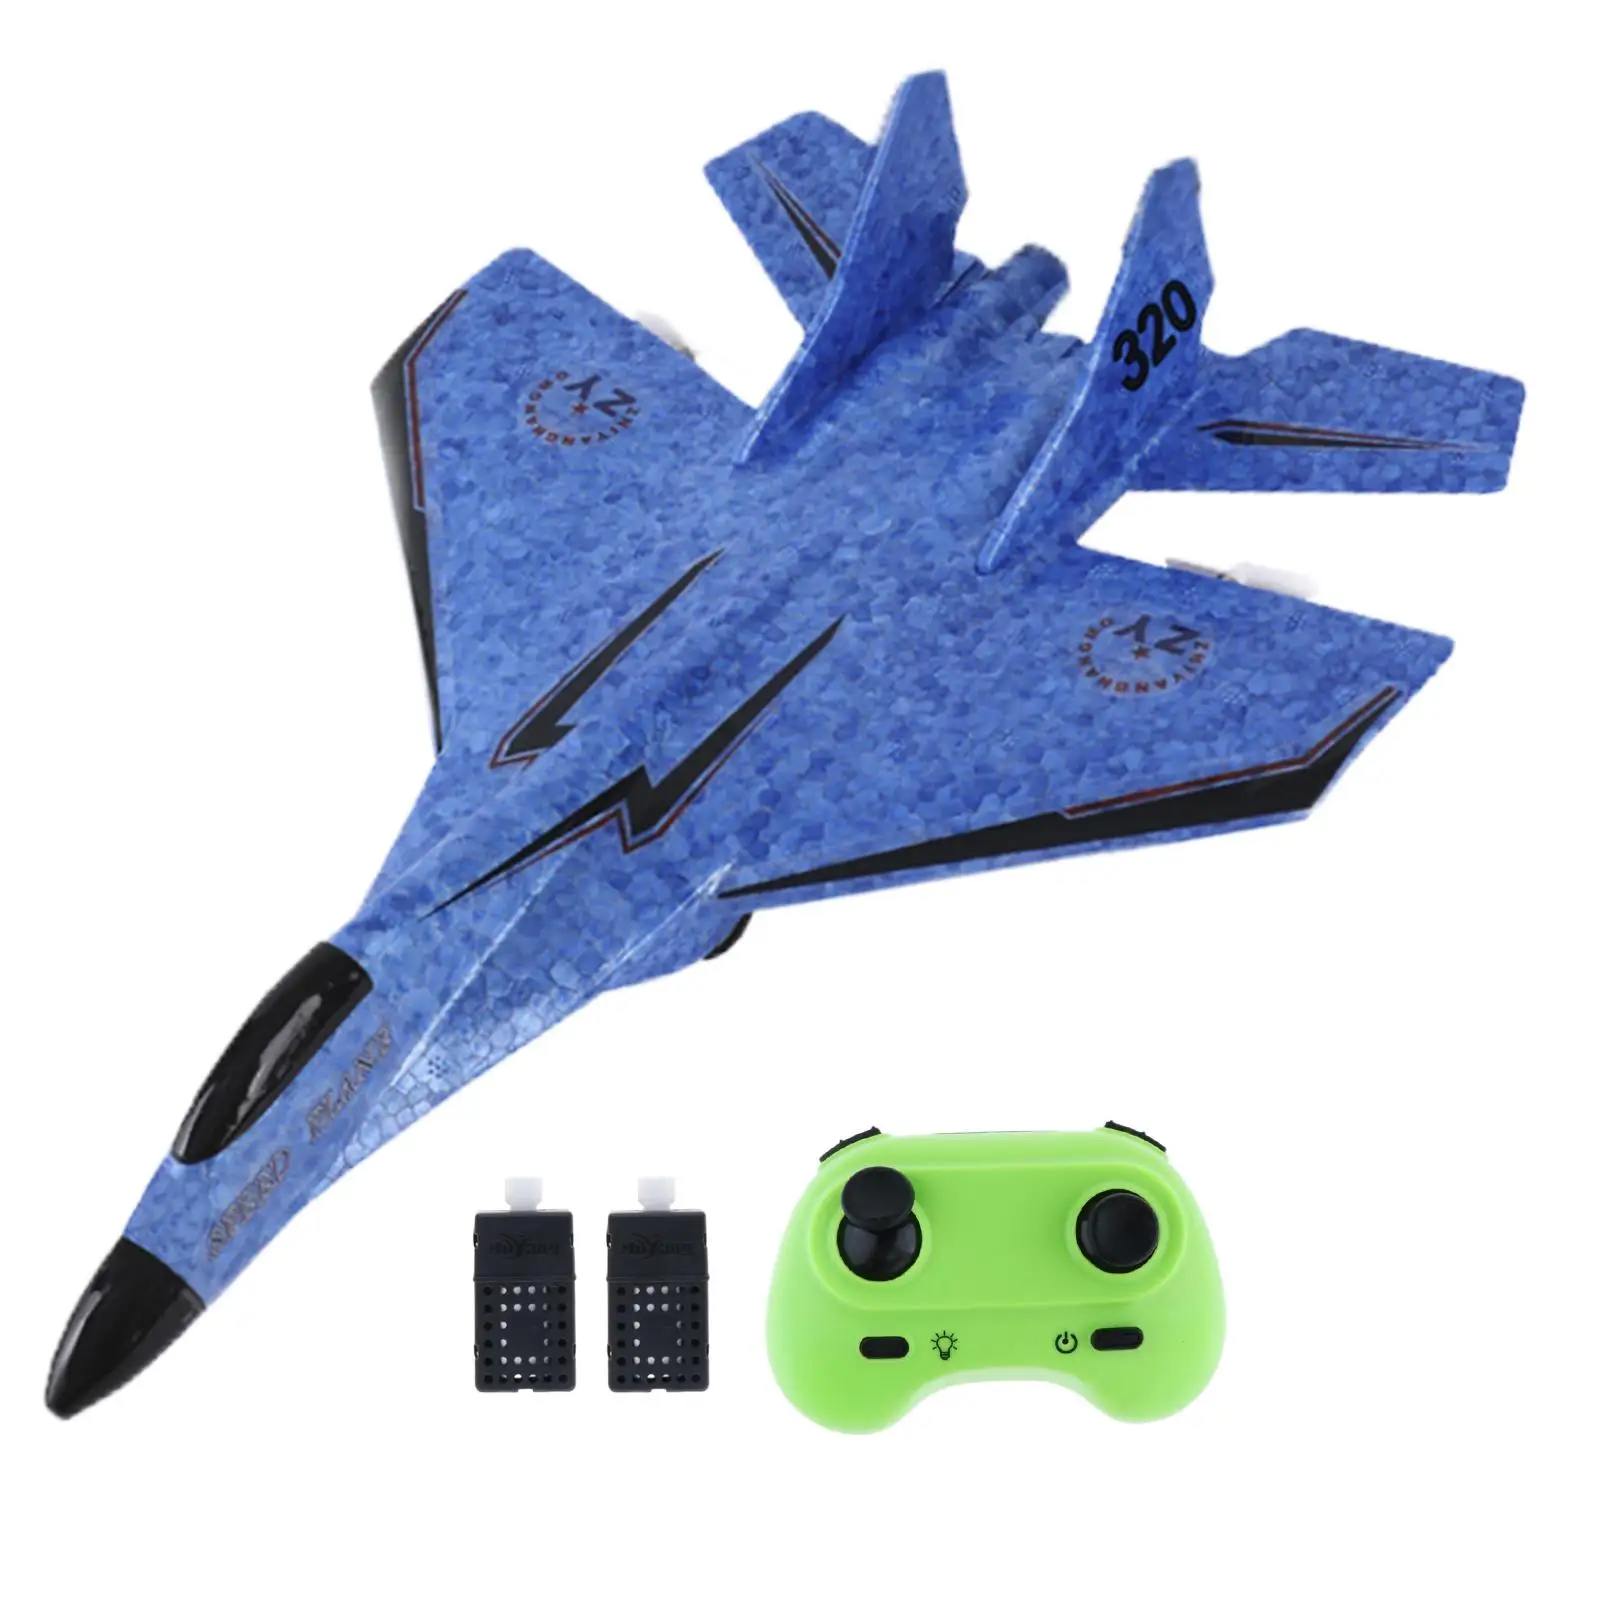 

Foam Plane Jet Fighter Anti Collision Ready to Fly Airplane Model Toys Fixed Wing Aircraft for Beginners Boy Gift Outdoor Toy